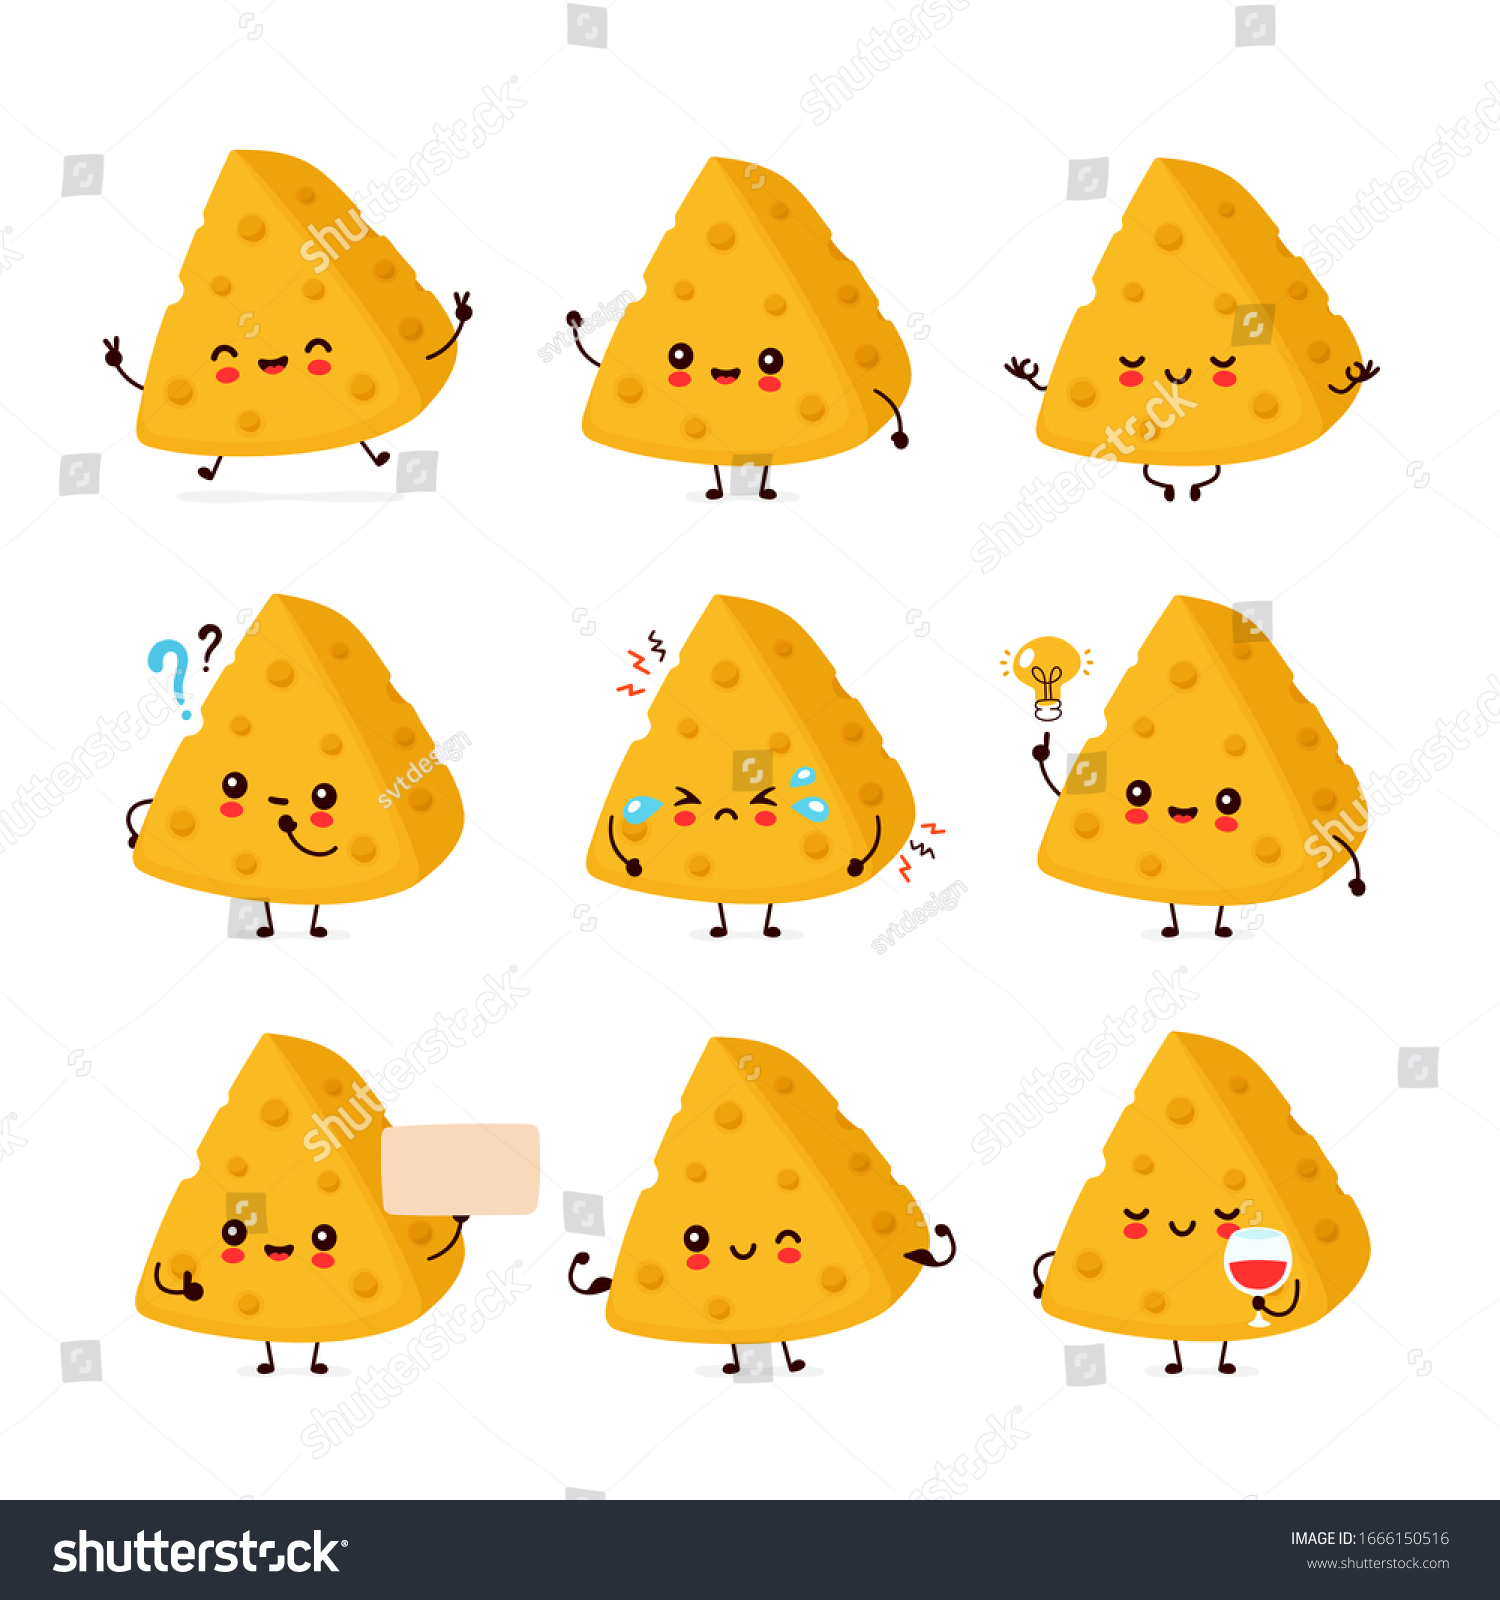 SVG of Cute happy smiling milk cheese emoji set collection.Vector cartoon face character illustration icon design.Isolated on white background.Cheese wine appetizer idea mascot emoji, emoticon bundle concept svg